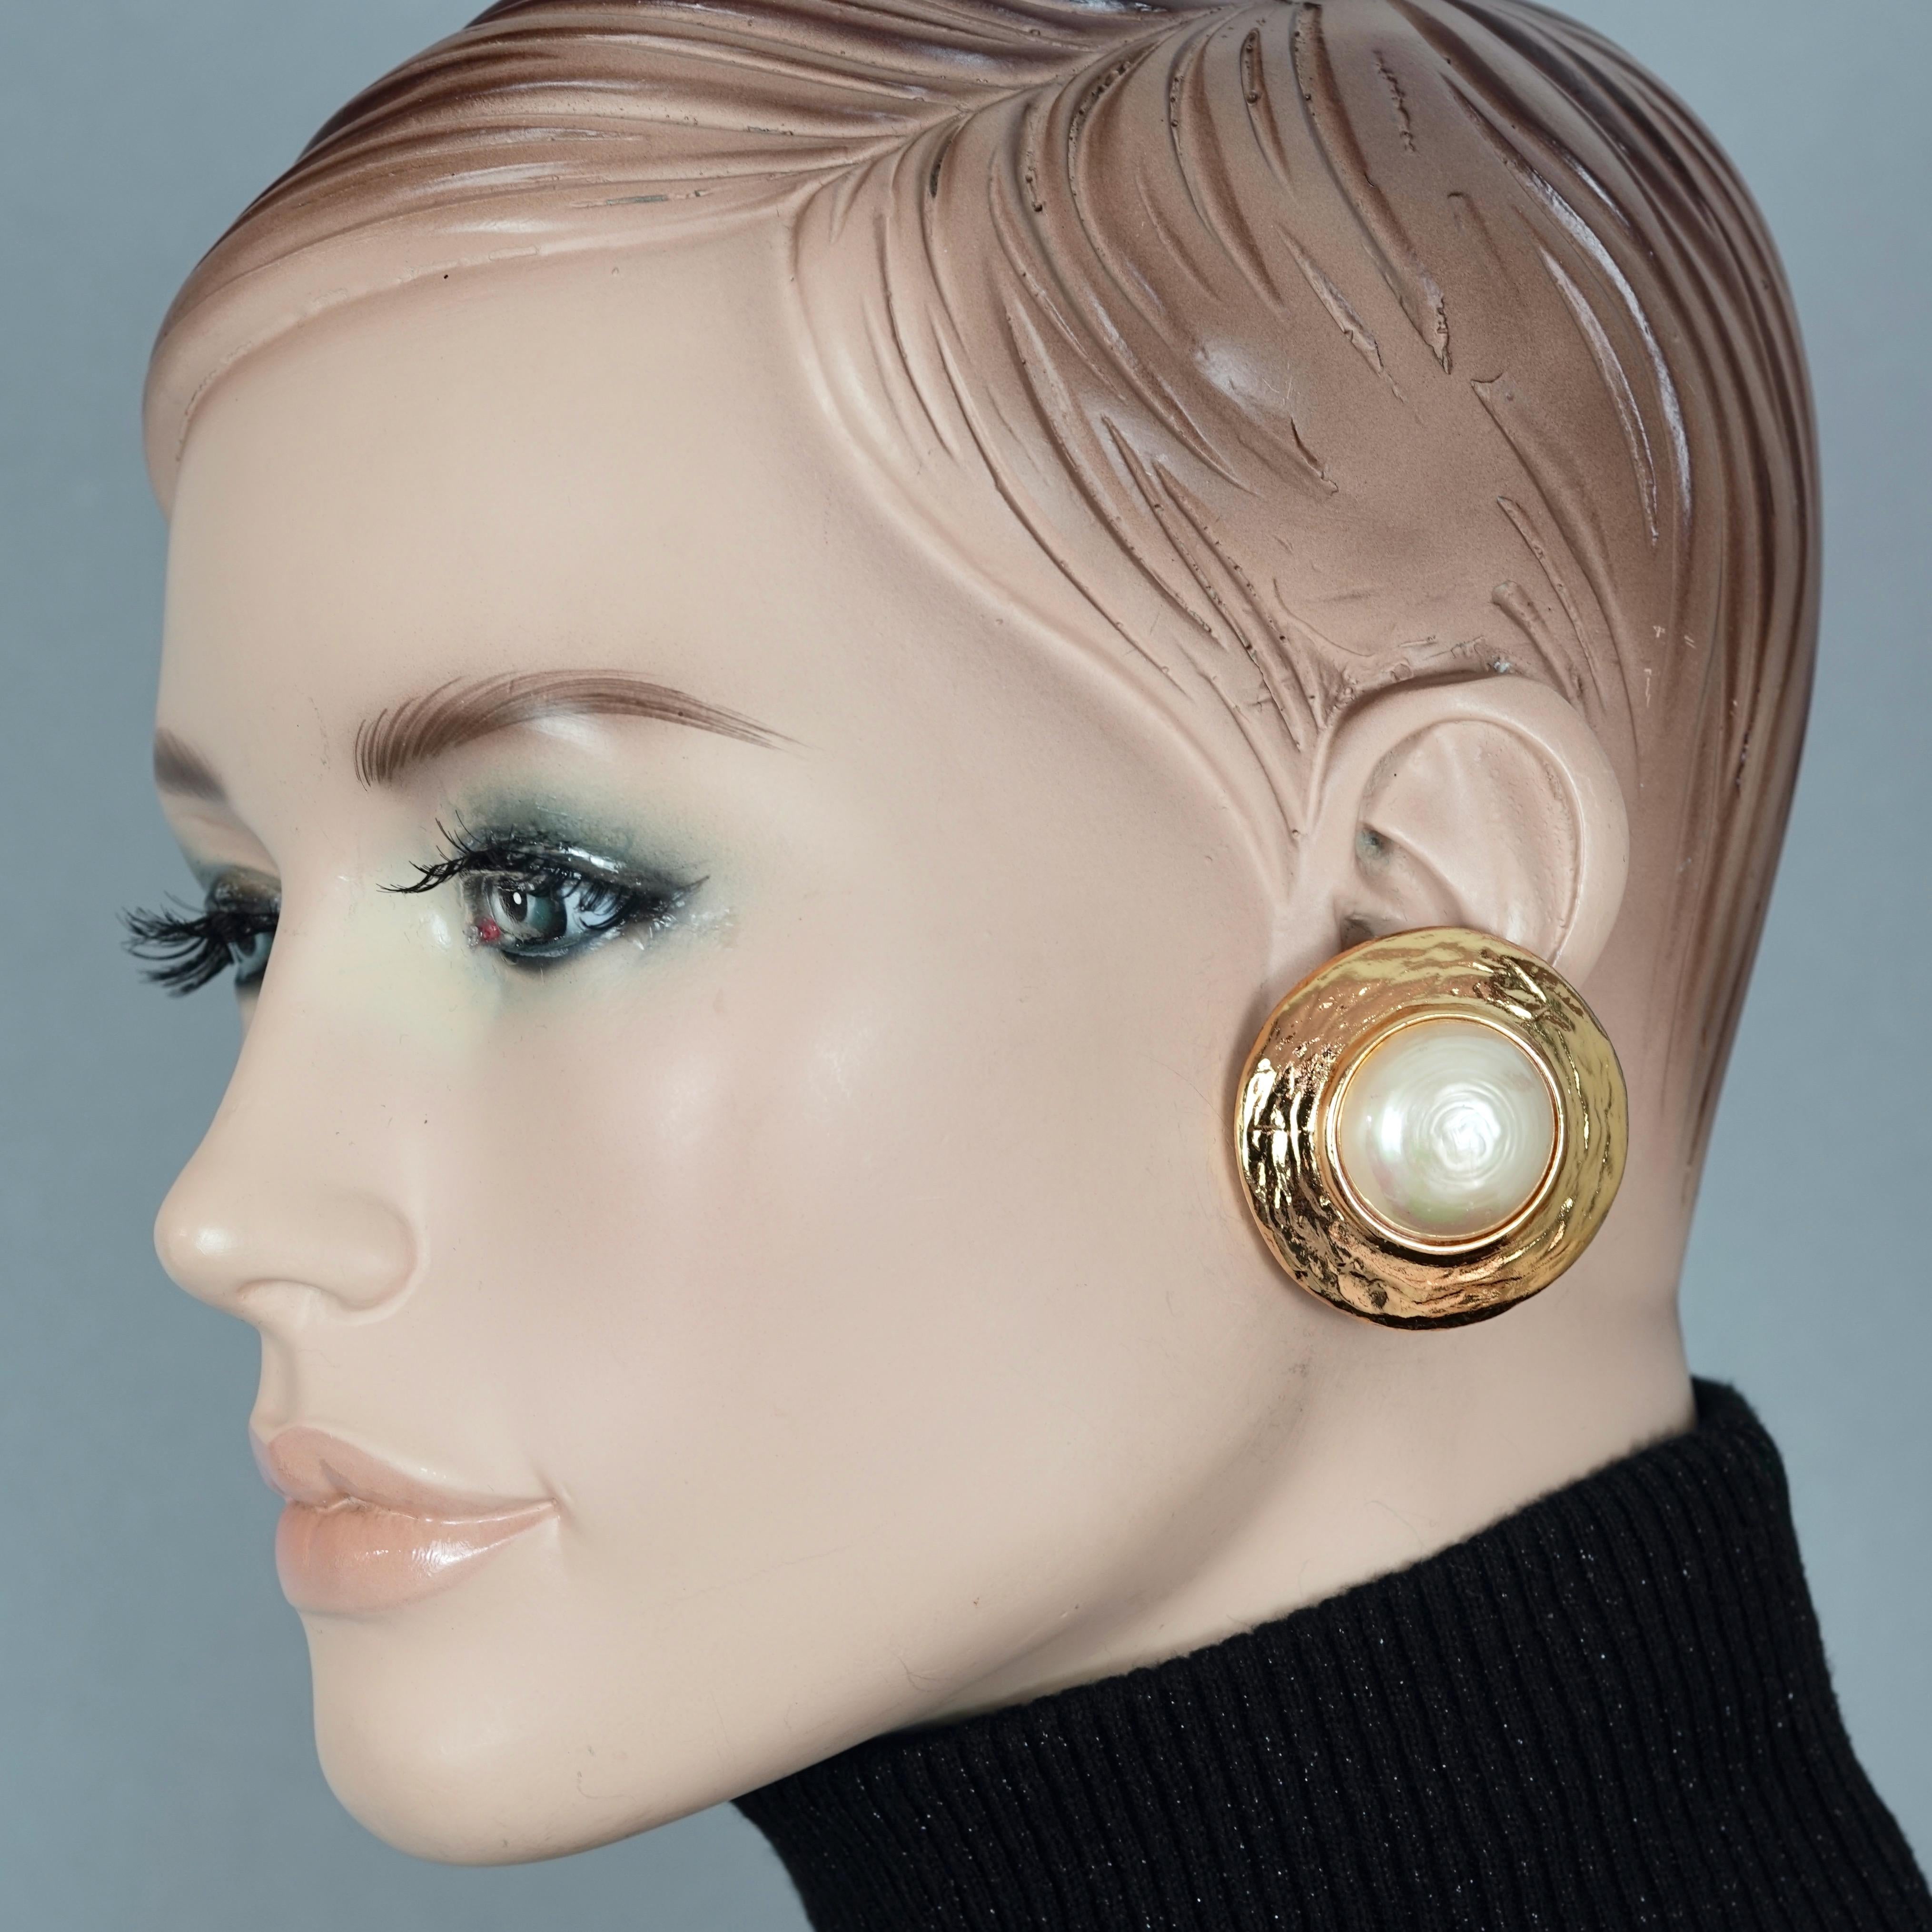 Vintage YVES SAINT LAURENT Ysl Pearl Textured Disc Earrings

Measurements:
Height: 1.61 inches (4.1 cm)
Width: 1.61 inches (4.1 cm)
Weight per Earring: 28 grams

Features:
- 100% Authentic YVES SAINT LAURENT.
- Textured discs with pearl at the